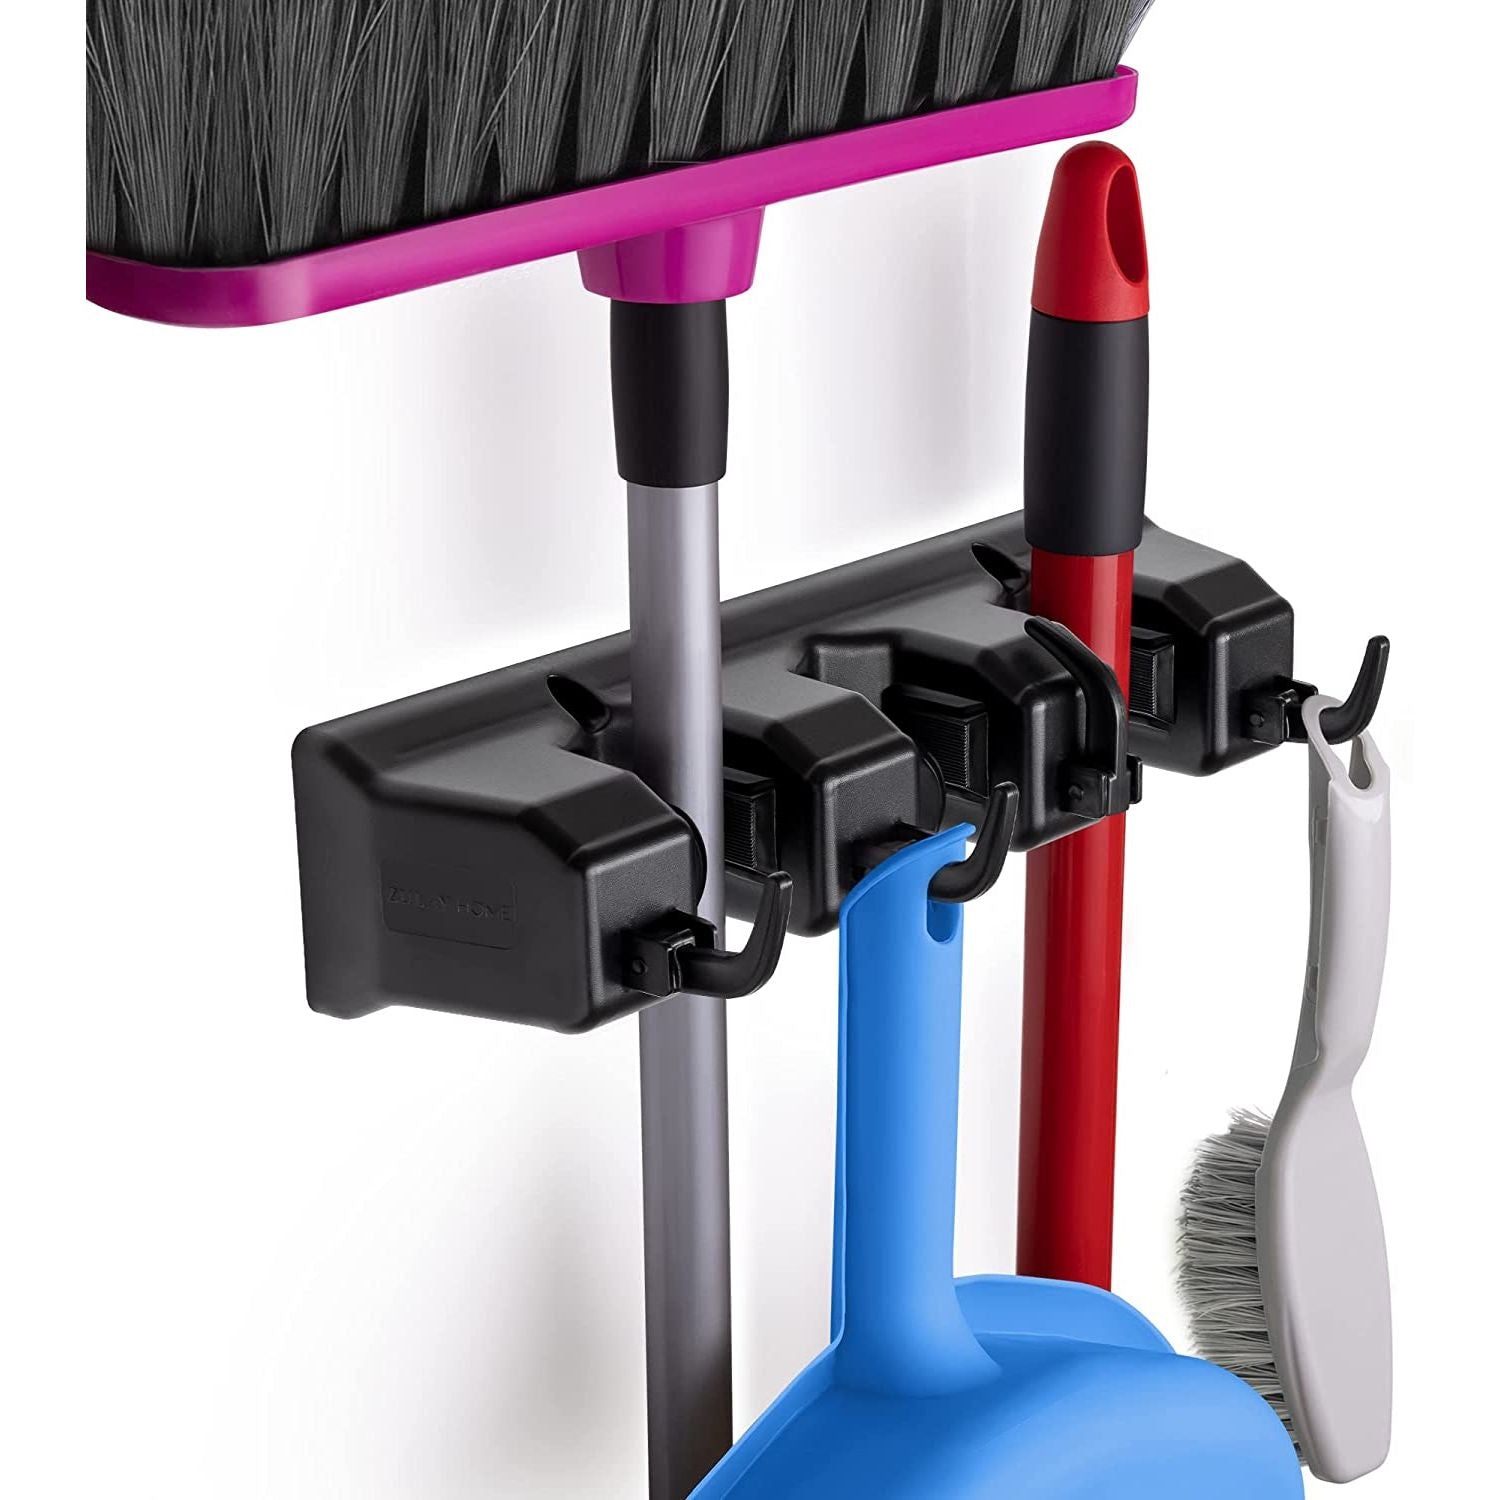 Mop and Broom Organizer Wall Mount – Holds Up to 50 lbs of Weight - Versatile Equipment Holder